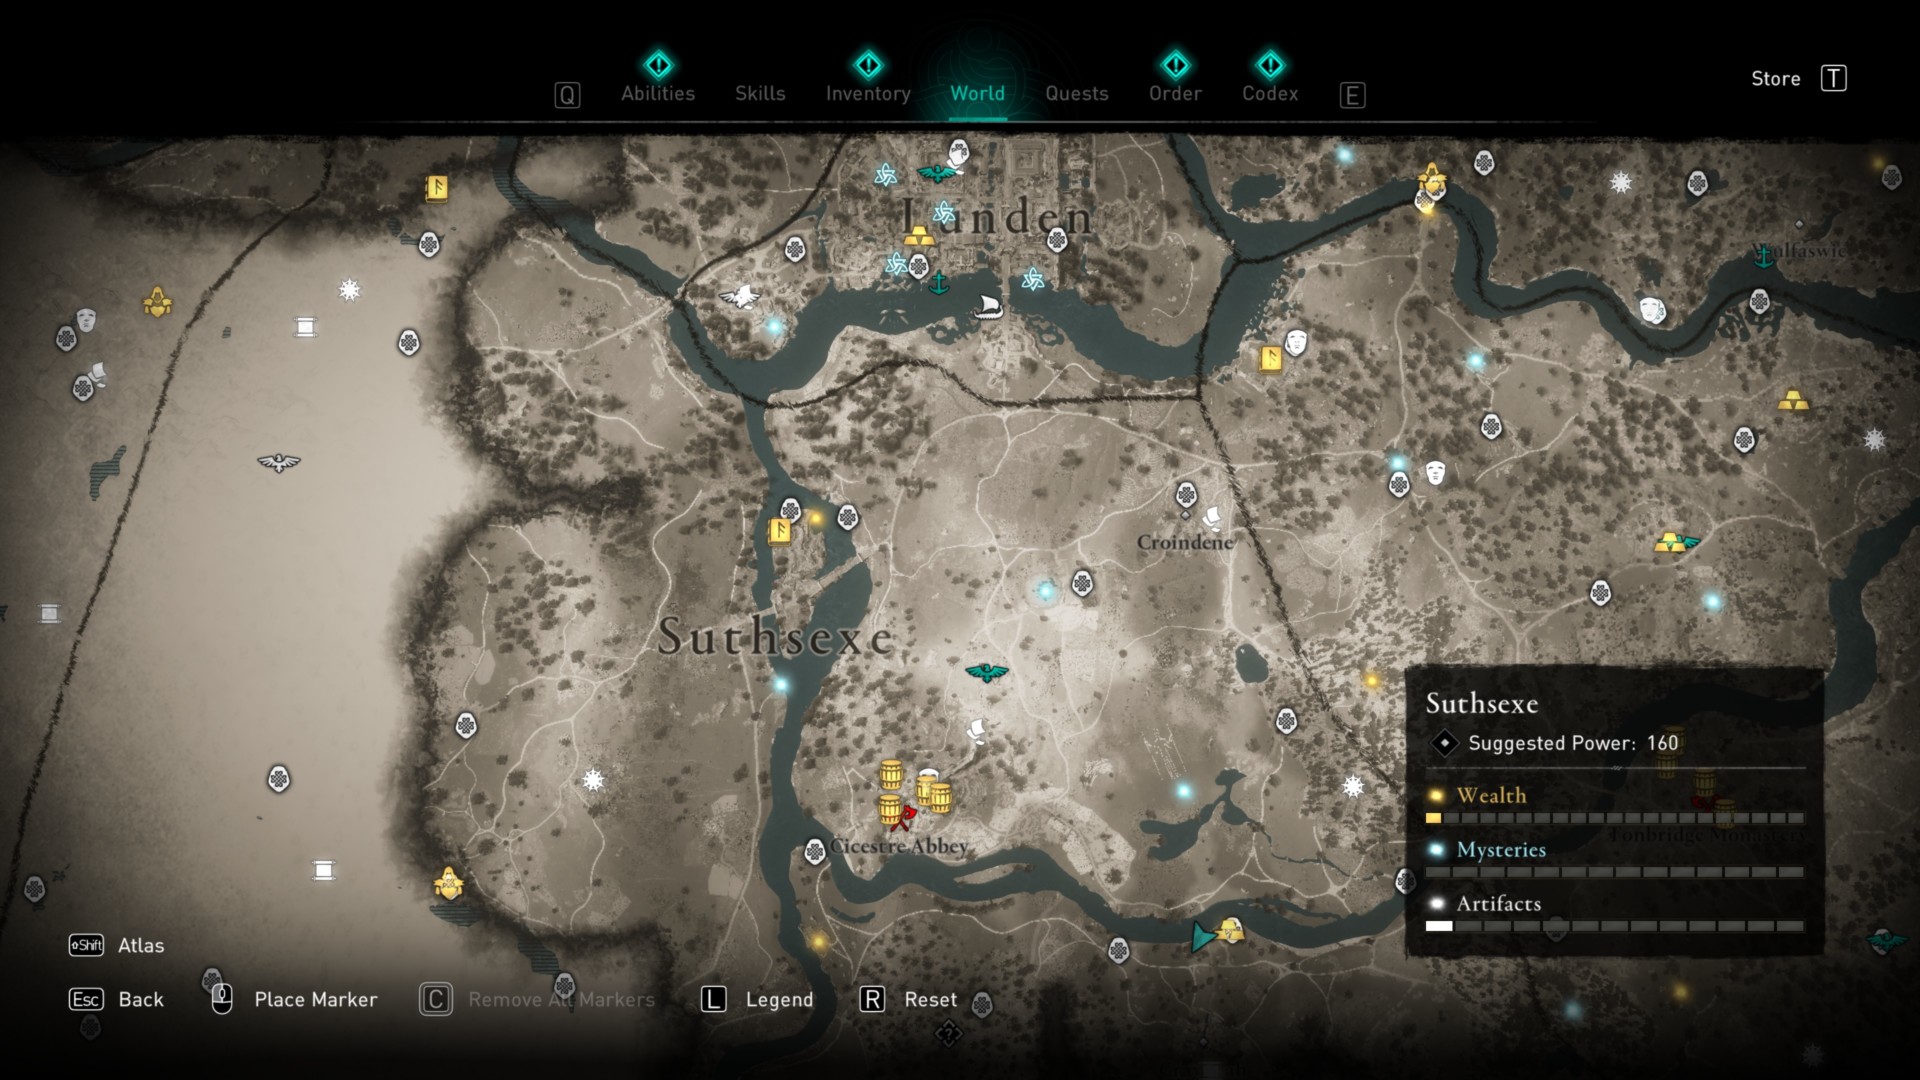 Assassin's Creed Valhalla Suthsexe Artifact Guide